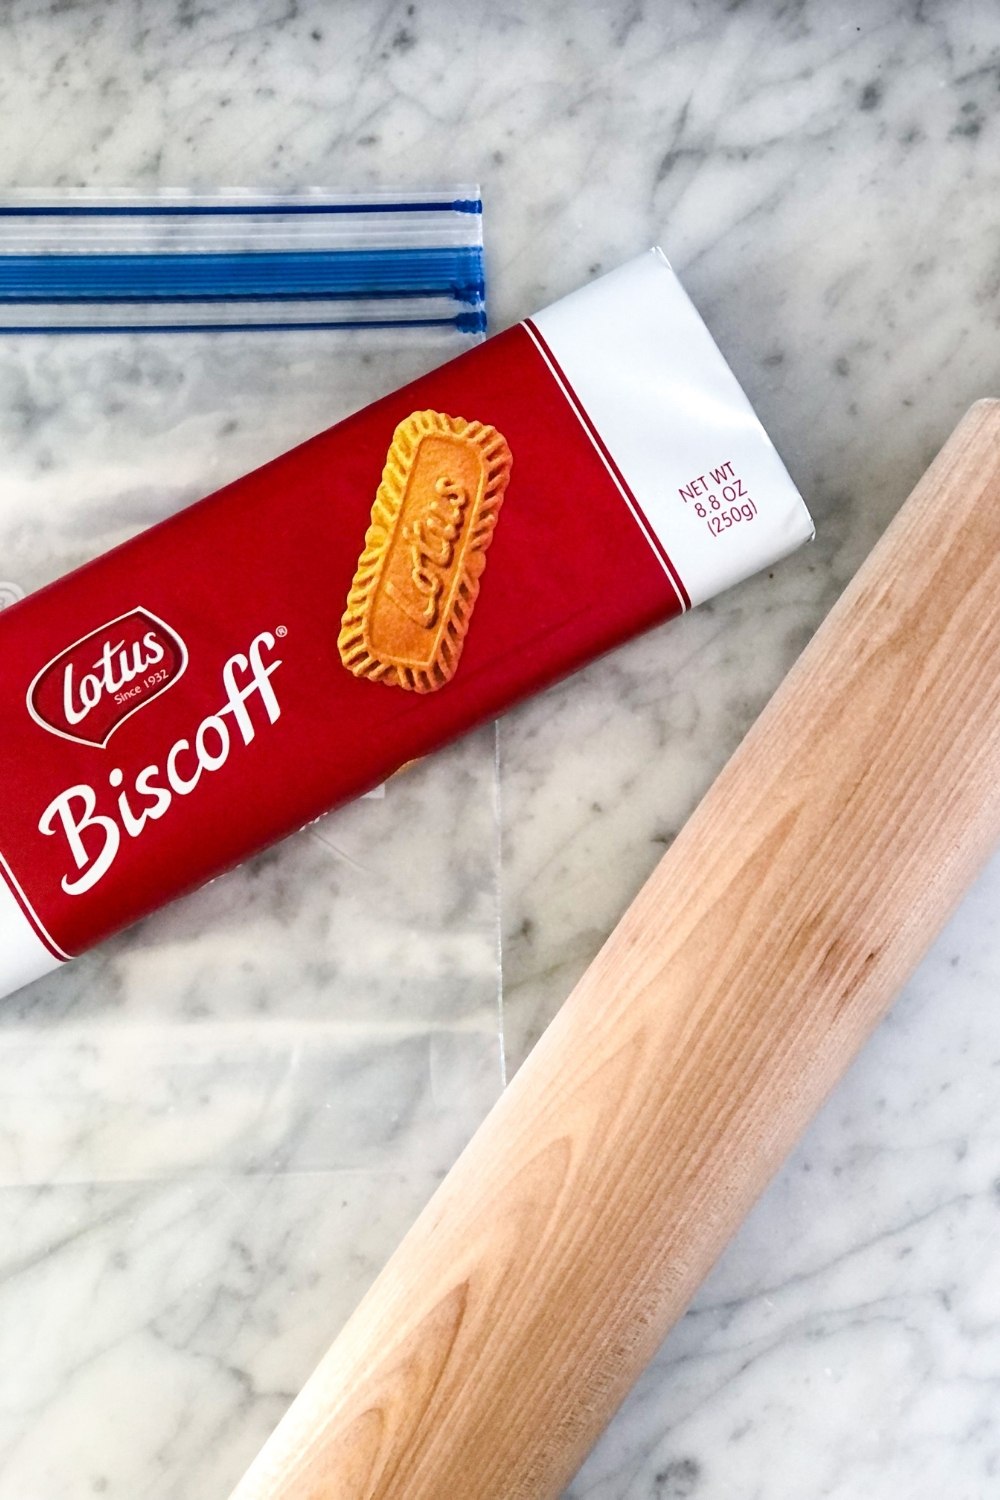 a package of lotus biscoff cookies next to a rolling pin